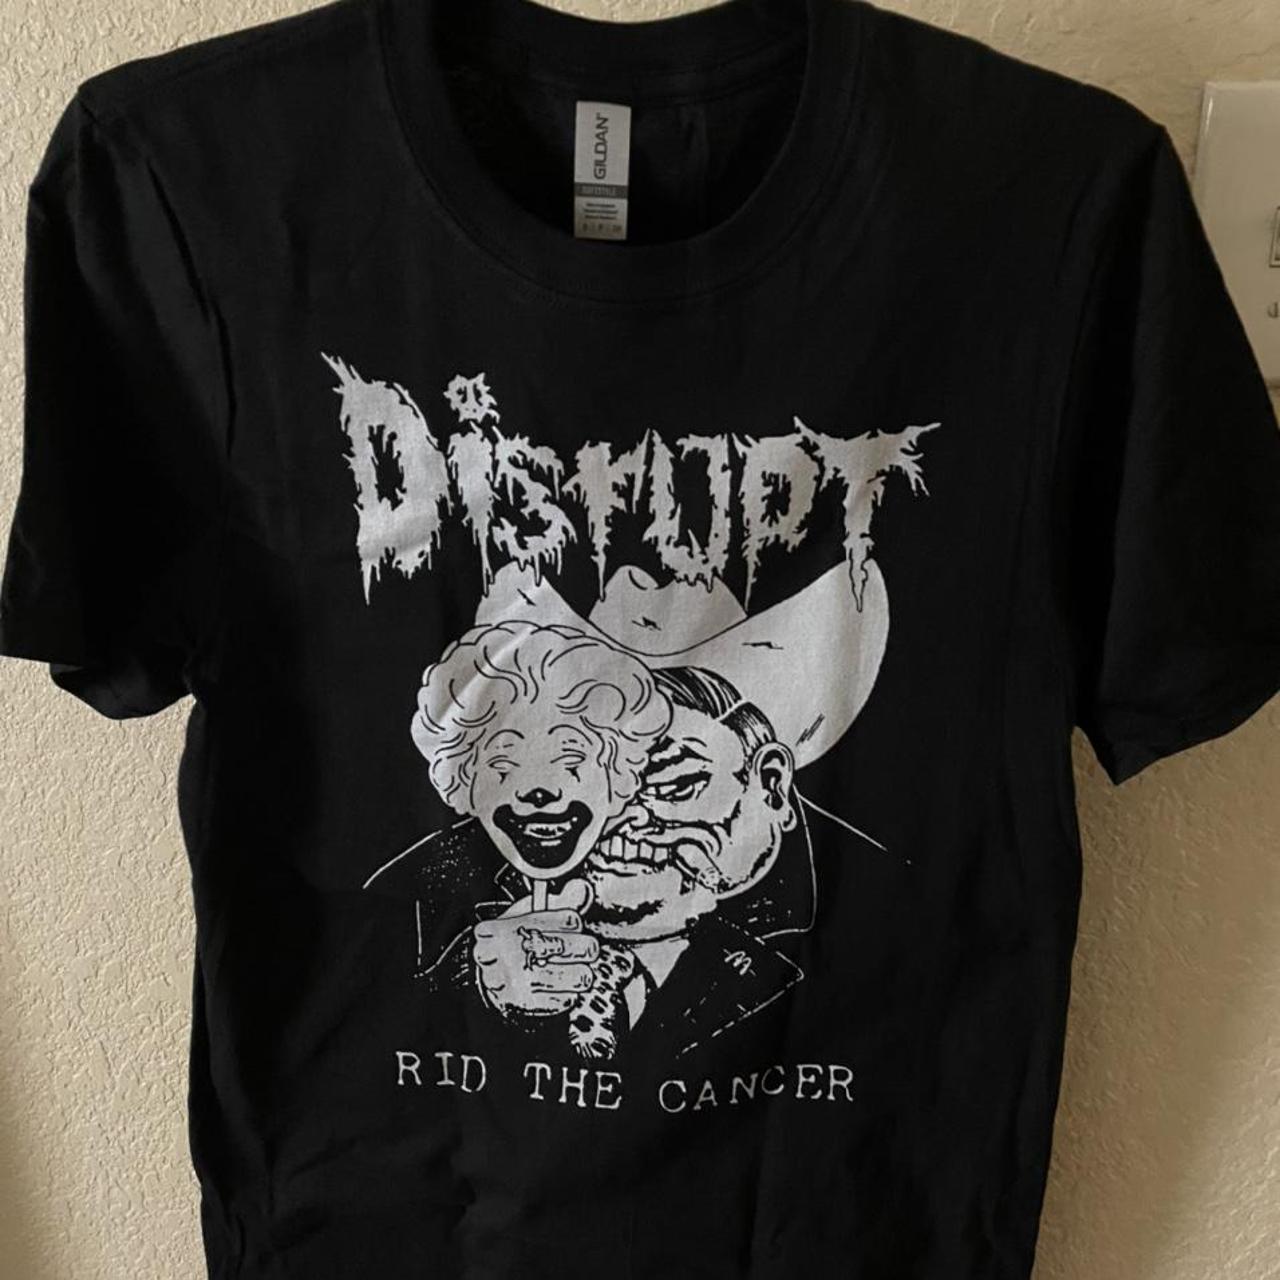 Product Image 1 - Disrupt rid the cancer tee
Brand